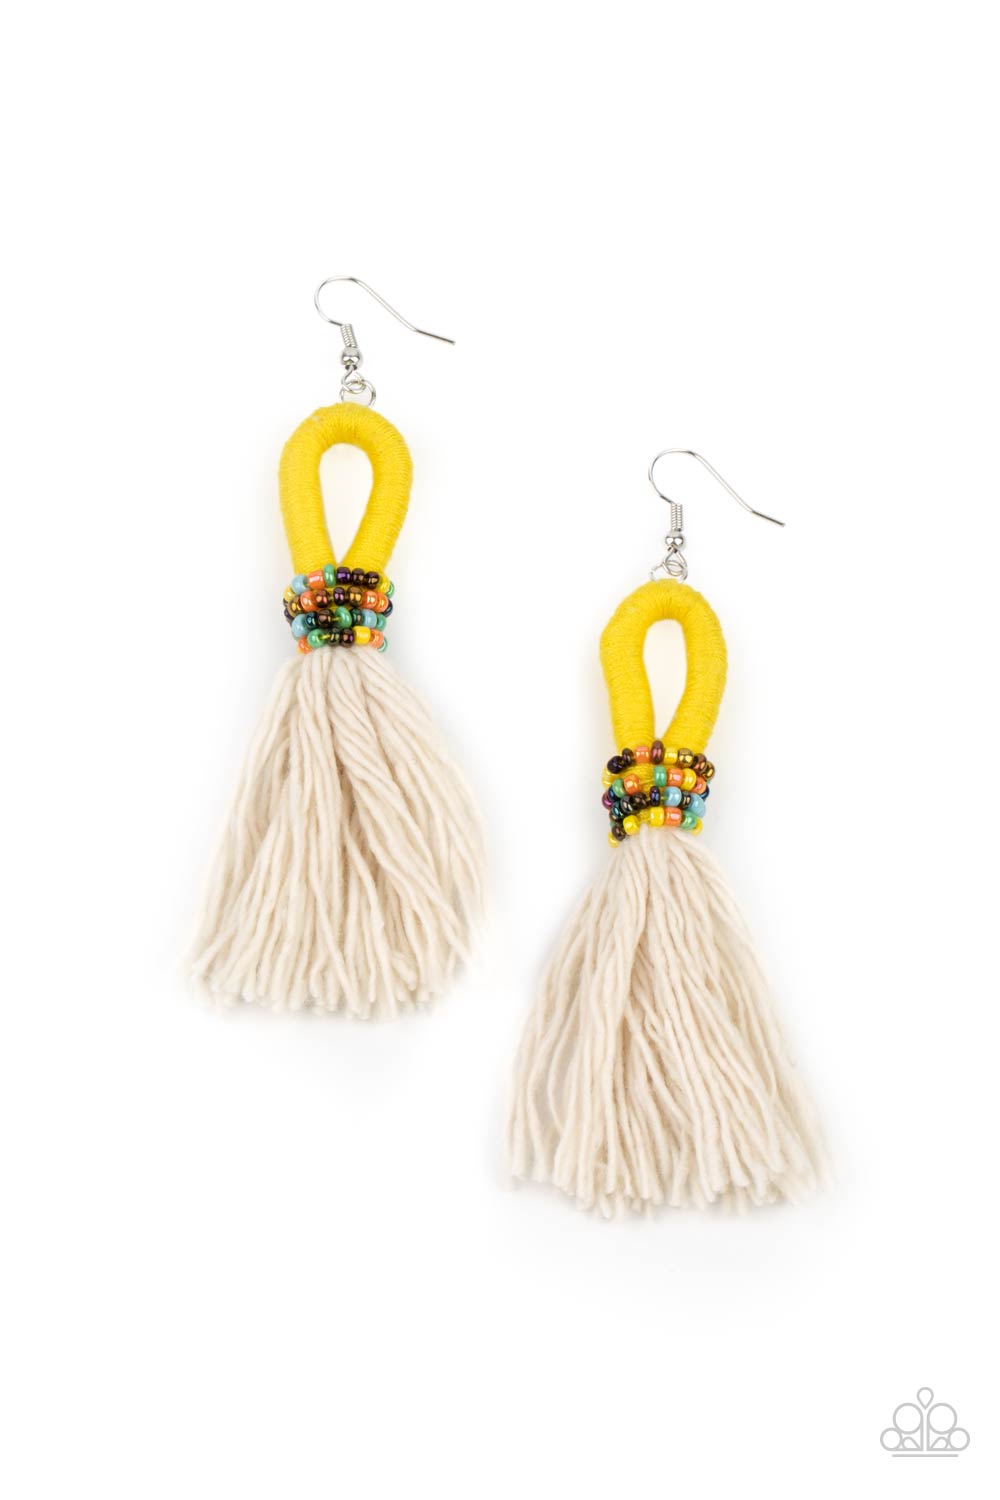 five-dollar-jewelry-the-dustup-yellow-earrings-paparazzi-accessories